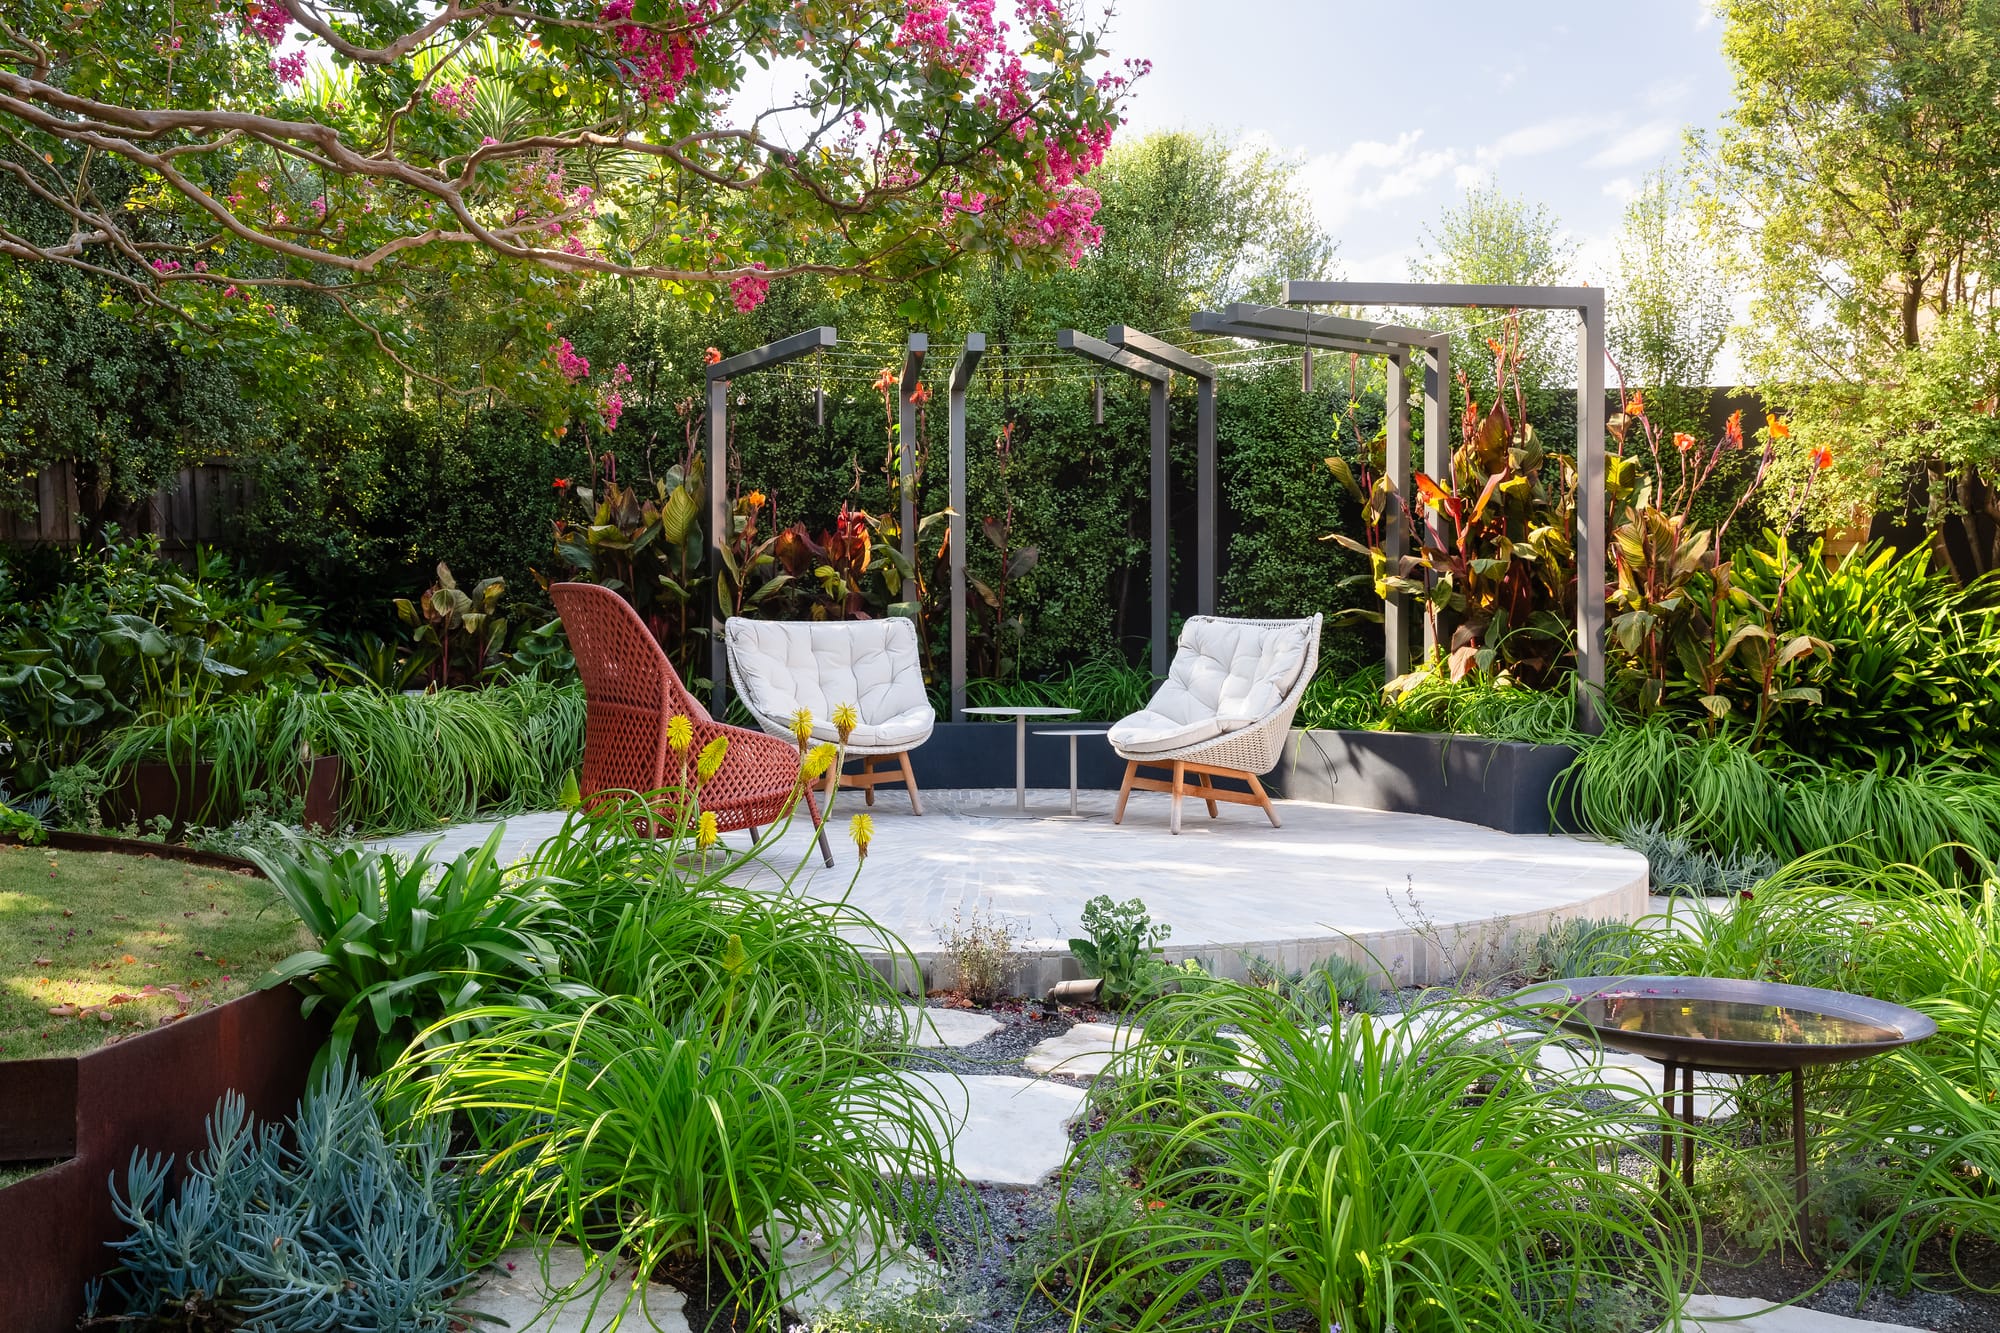 Iris Glen Iris by Julie Crowe Landscape Design. Photography by Erik Holt Photography.  Raied circular seating area in garden. Two white and one red chair underneath pergola. Surrounded by tall plants, trees and hedges.  